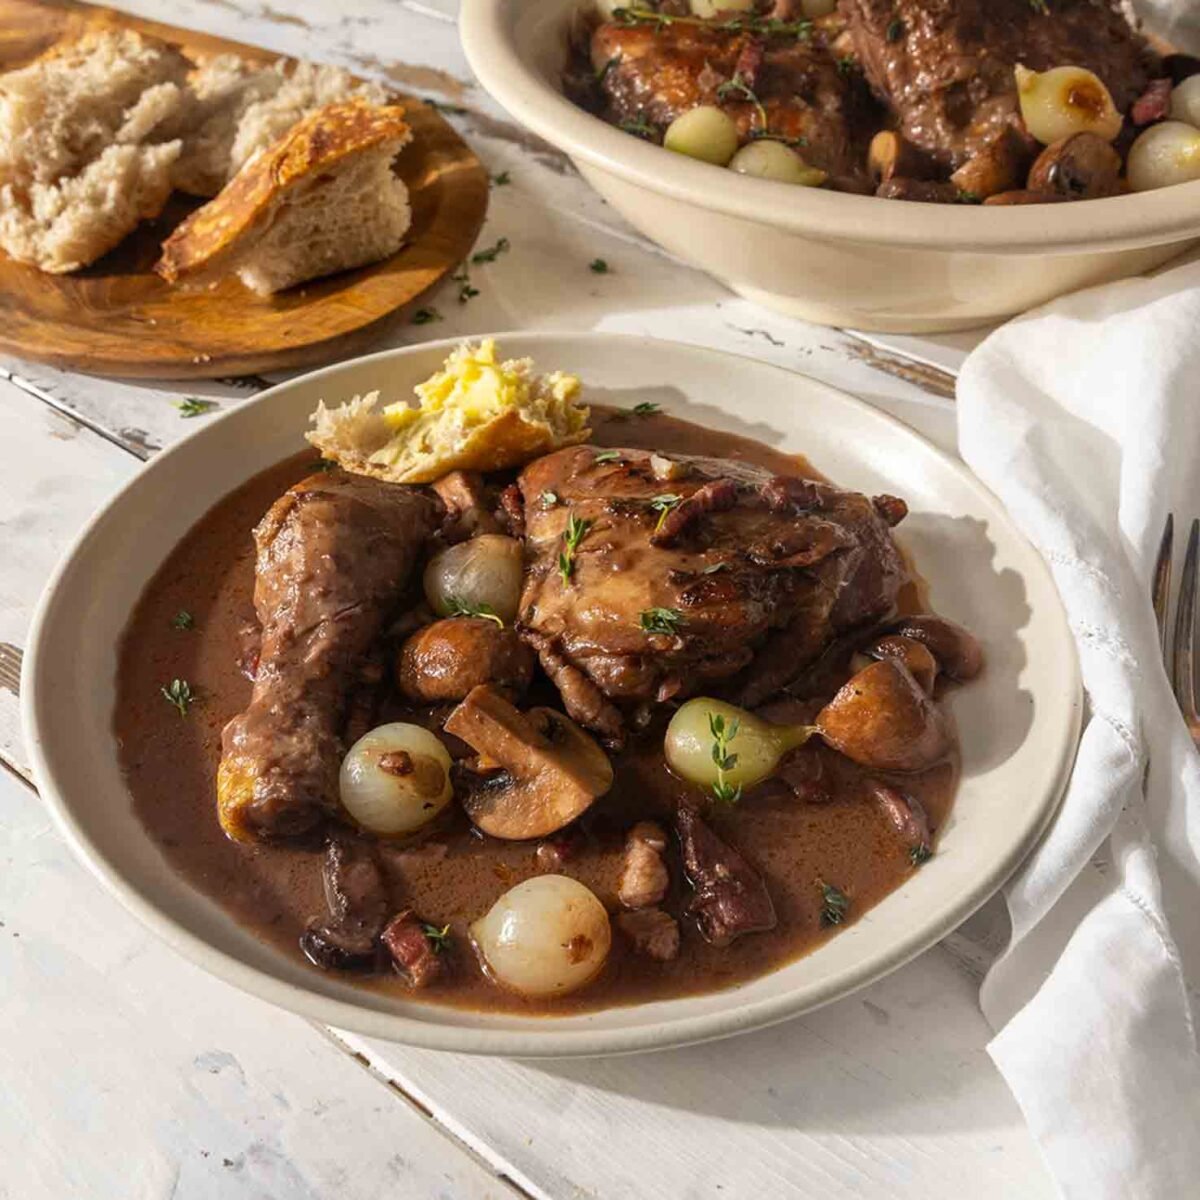 Two bowls of coq au vin on a table with sliced bread and fresh herbs.